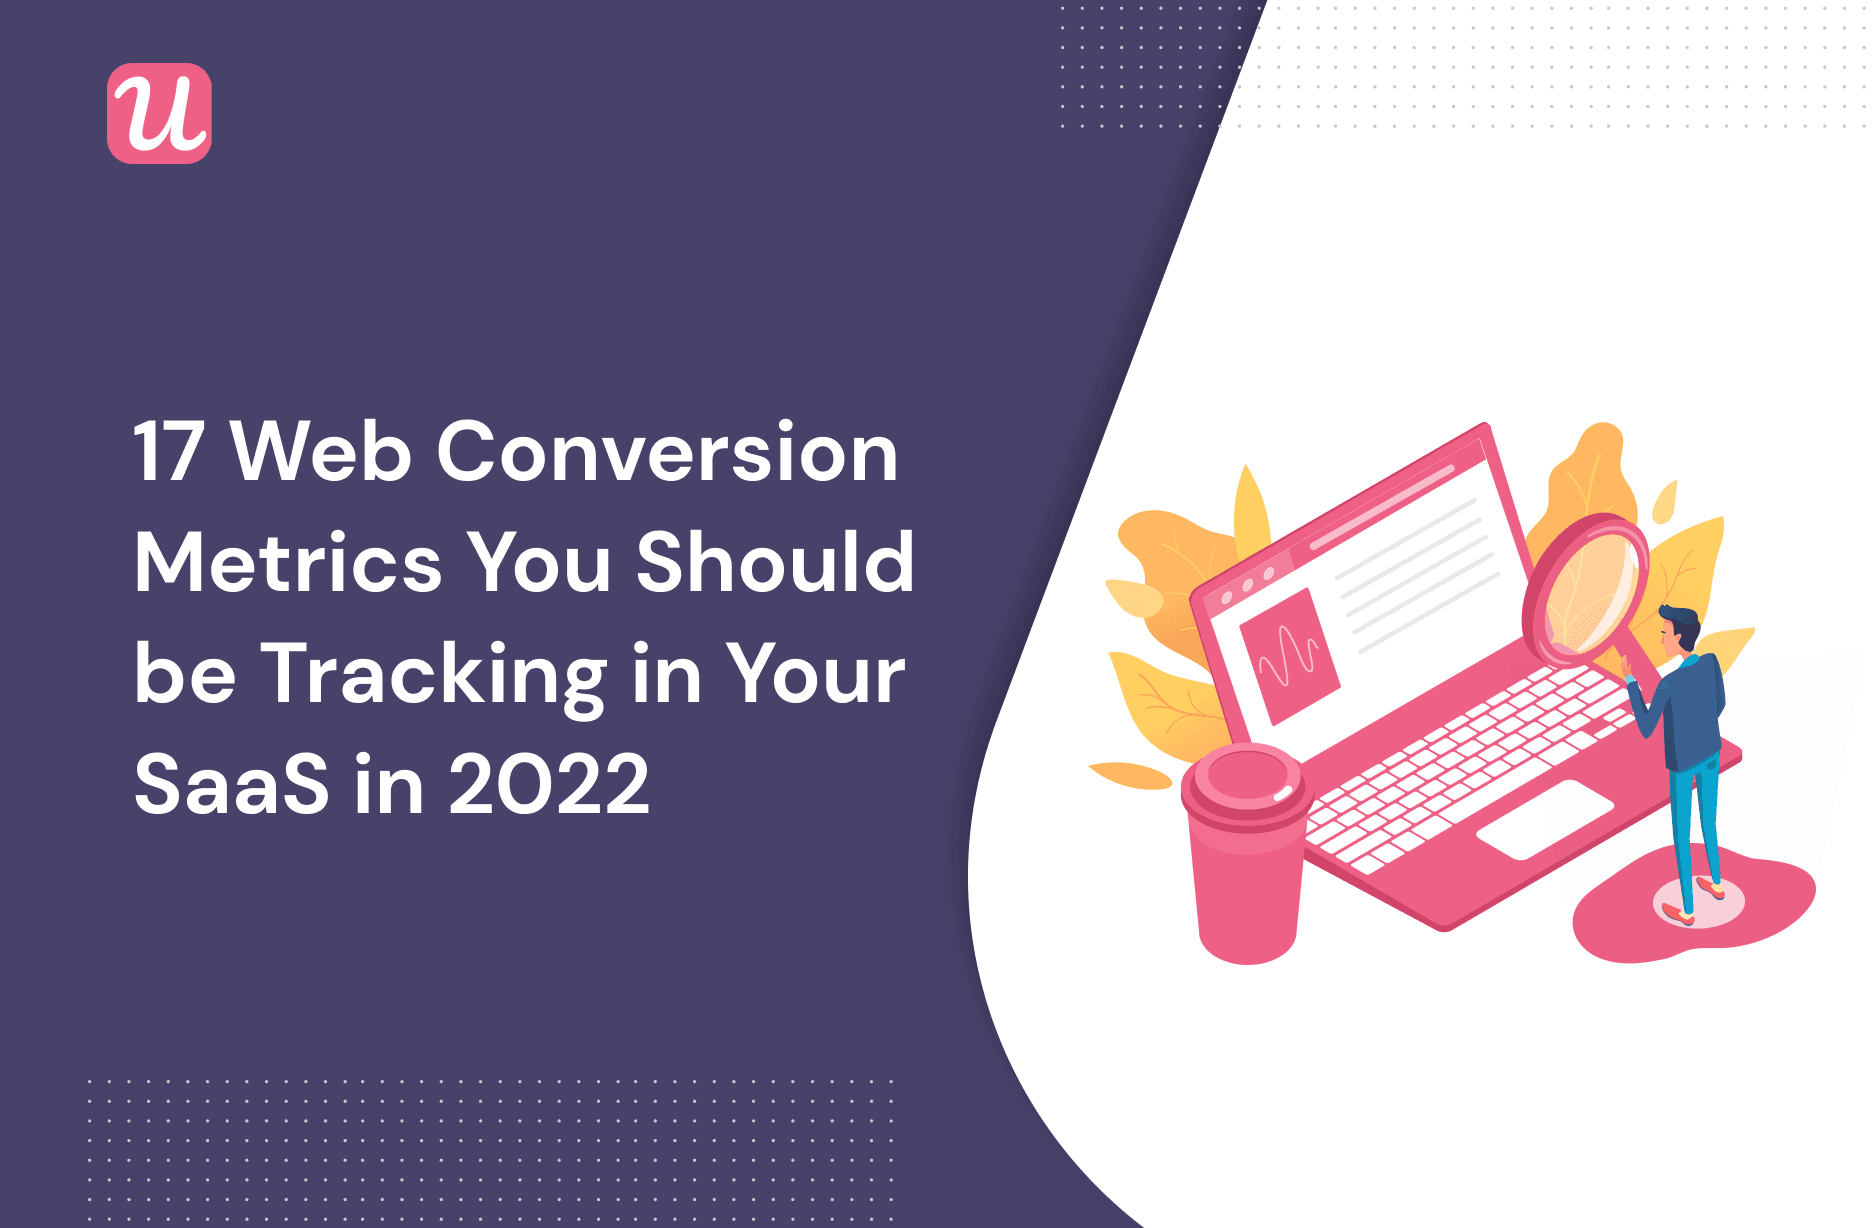 17 Web Conversion Metrics You Should be Tracking in Your SaaS in 2022